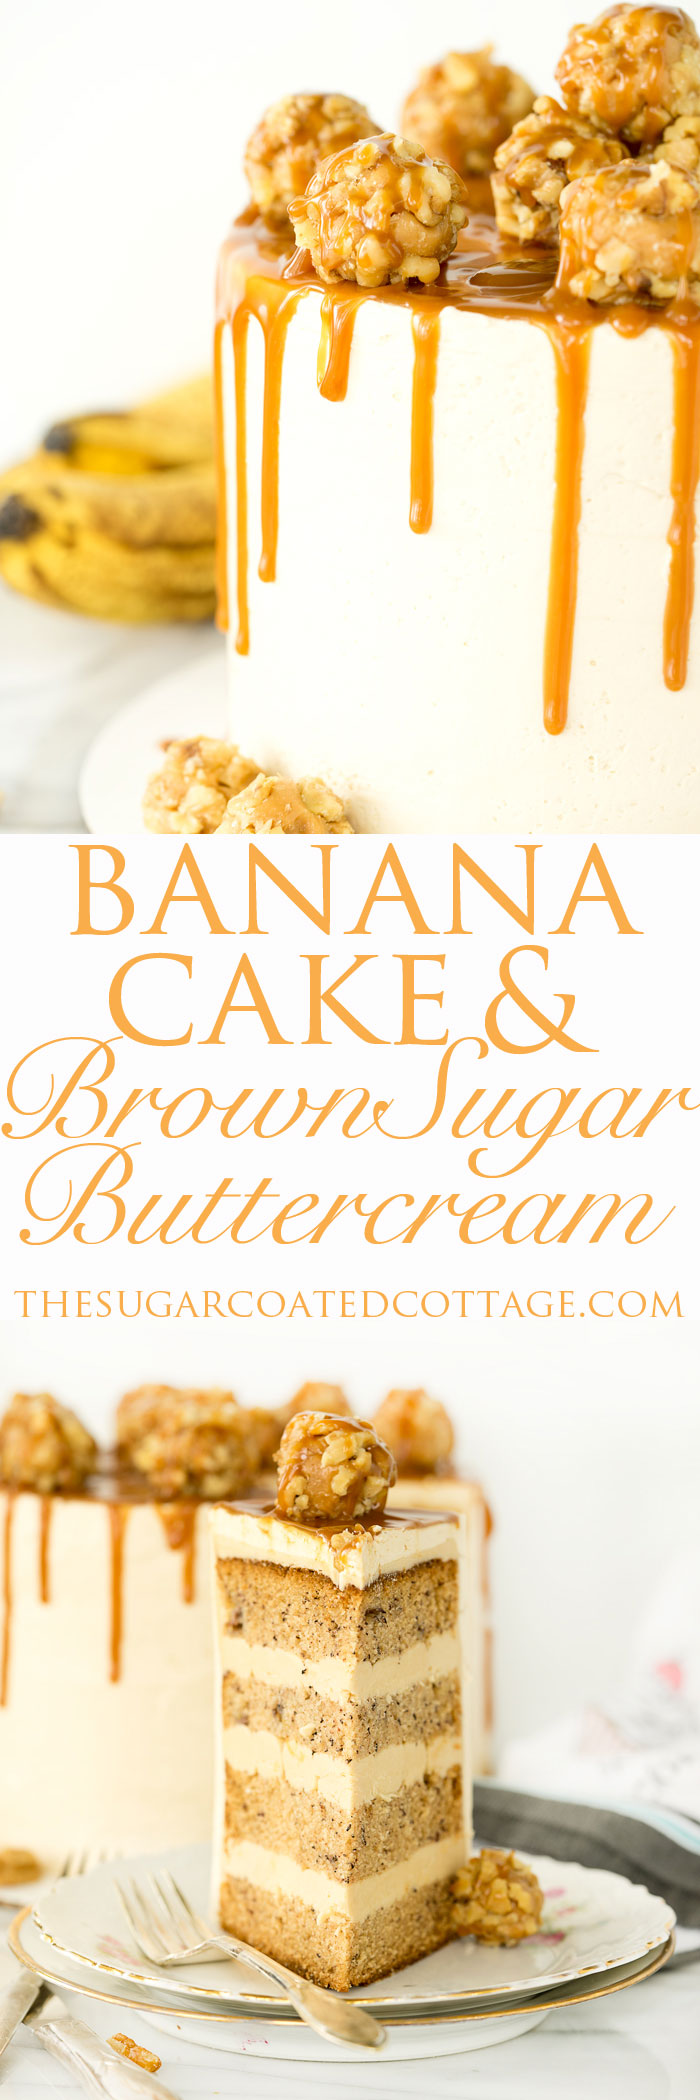 Banana Cake With Brown Sugar Swiss Meringue Buttercream!! Moist, delicious banana cake combined with my favorite, brown sugar swiss meringue buttercream. The best banana cake recipe and buttercream recipe you'll ever need. | thesugarcoatedcottage.com